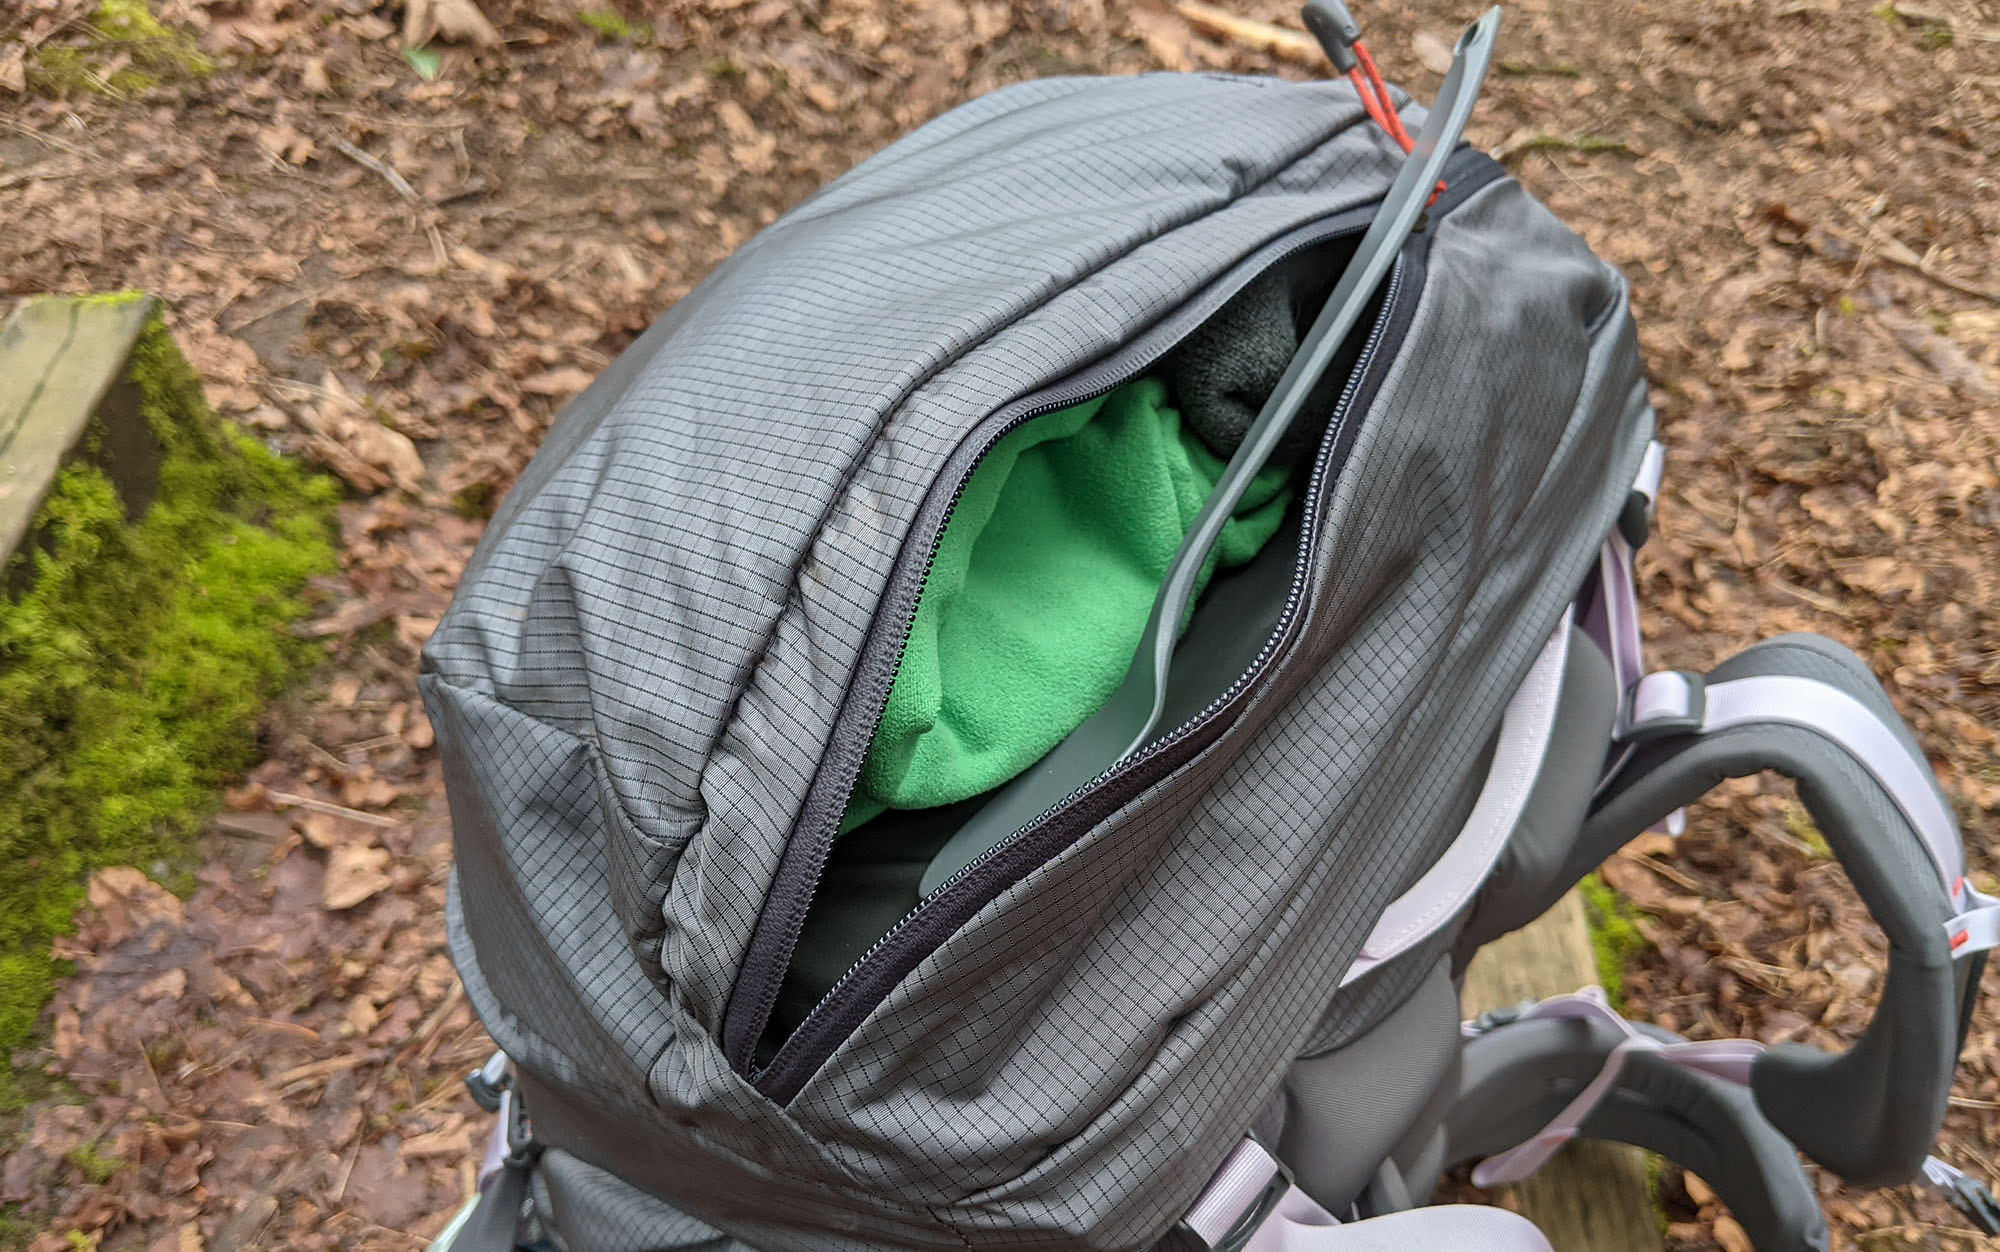 There is plenty of space in the top pocket for various sundry items, like extra clothing, a microfiber towel, and utensils. 